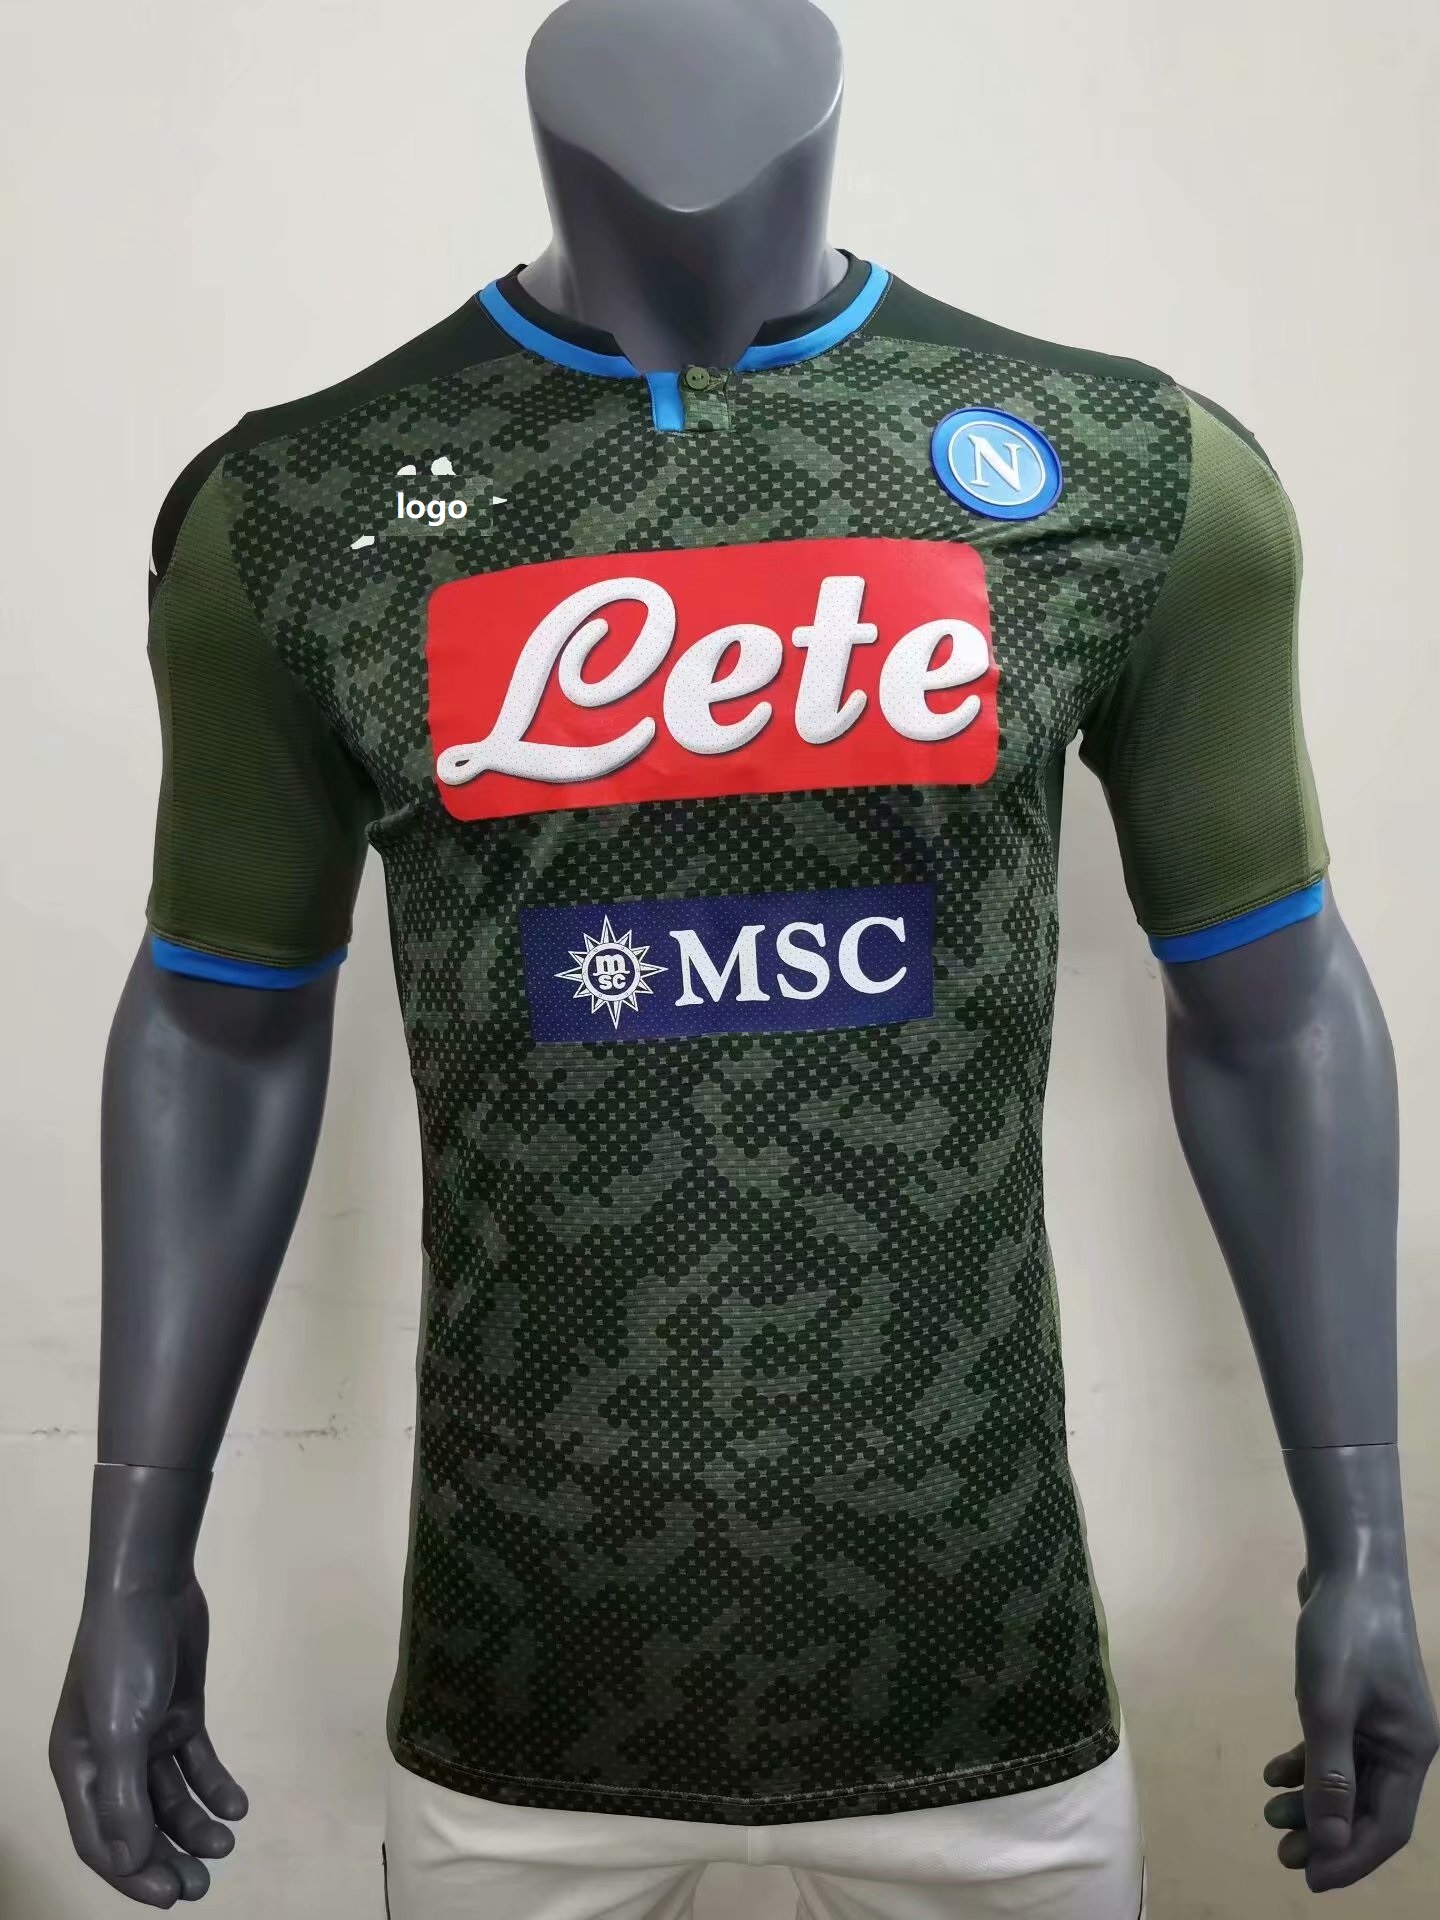 Download 19-20 Player Version Napoli adult soccer jersey football shirt